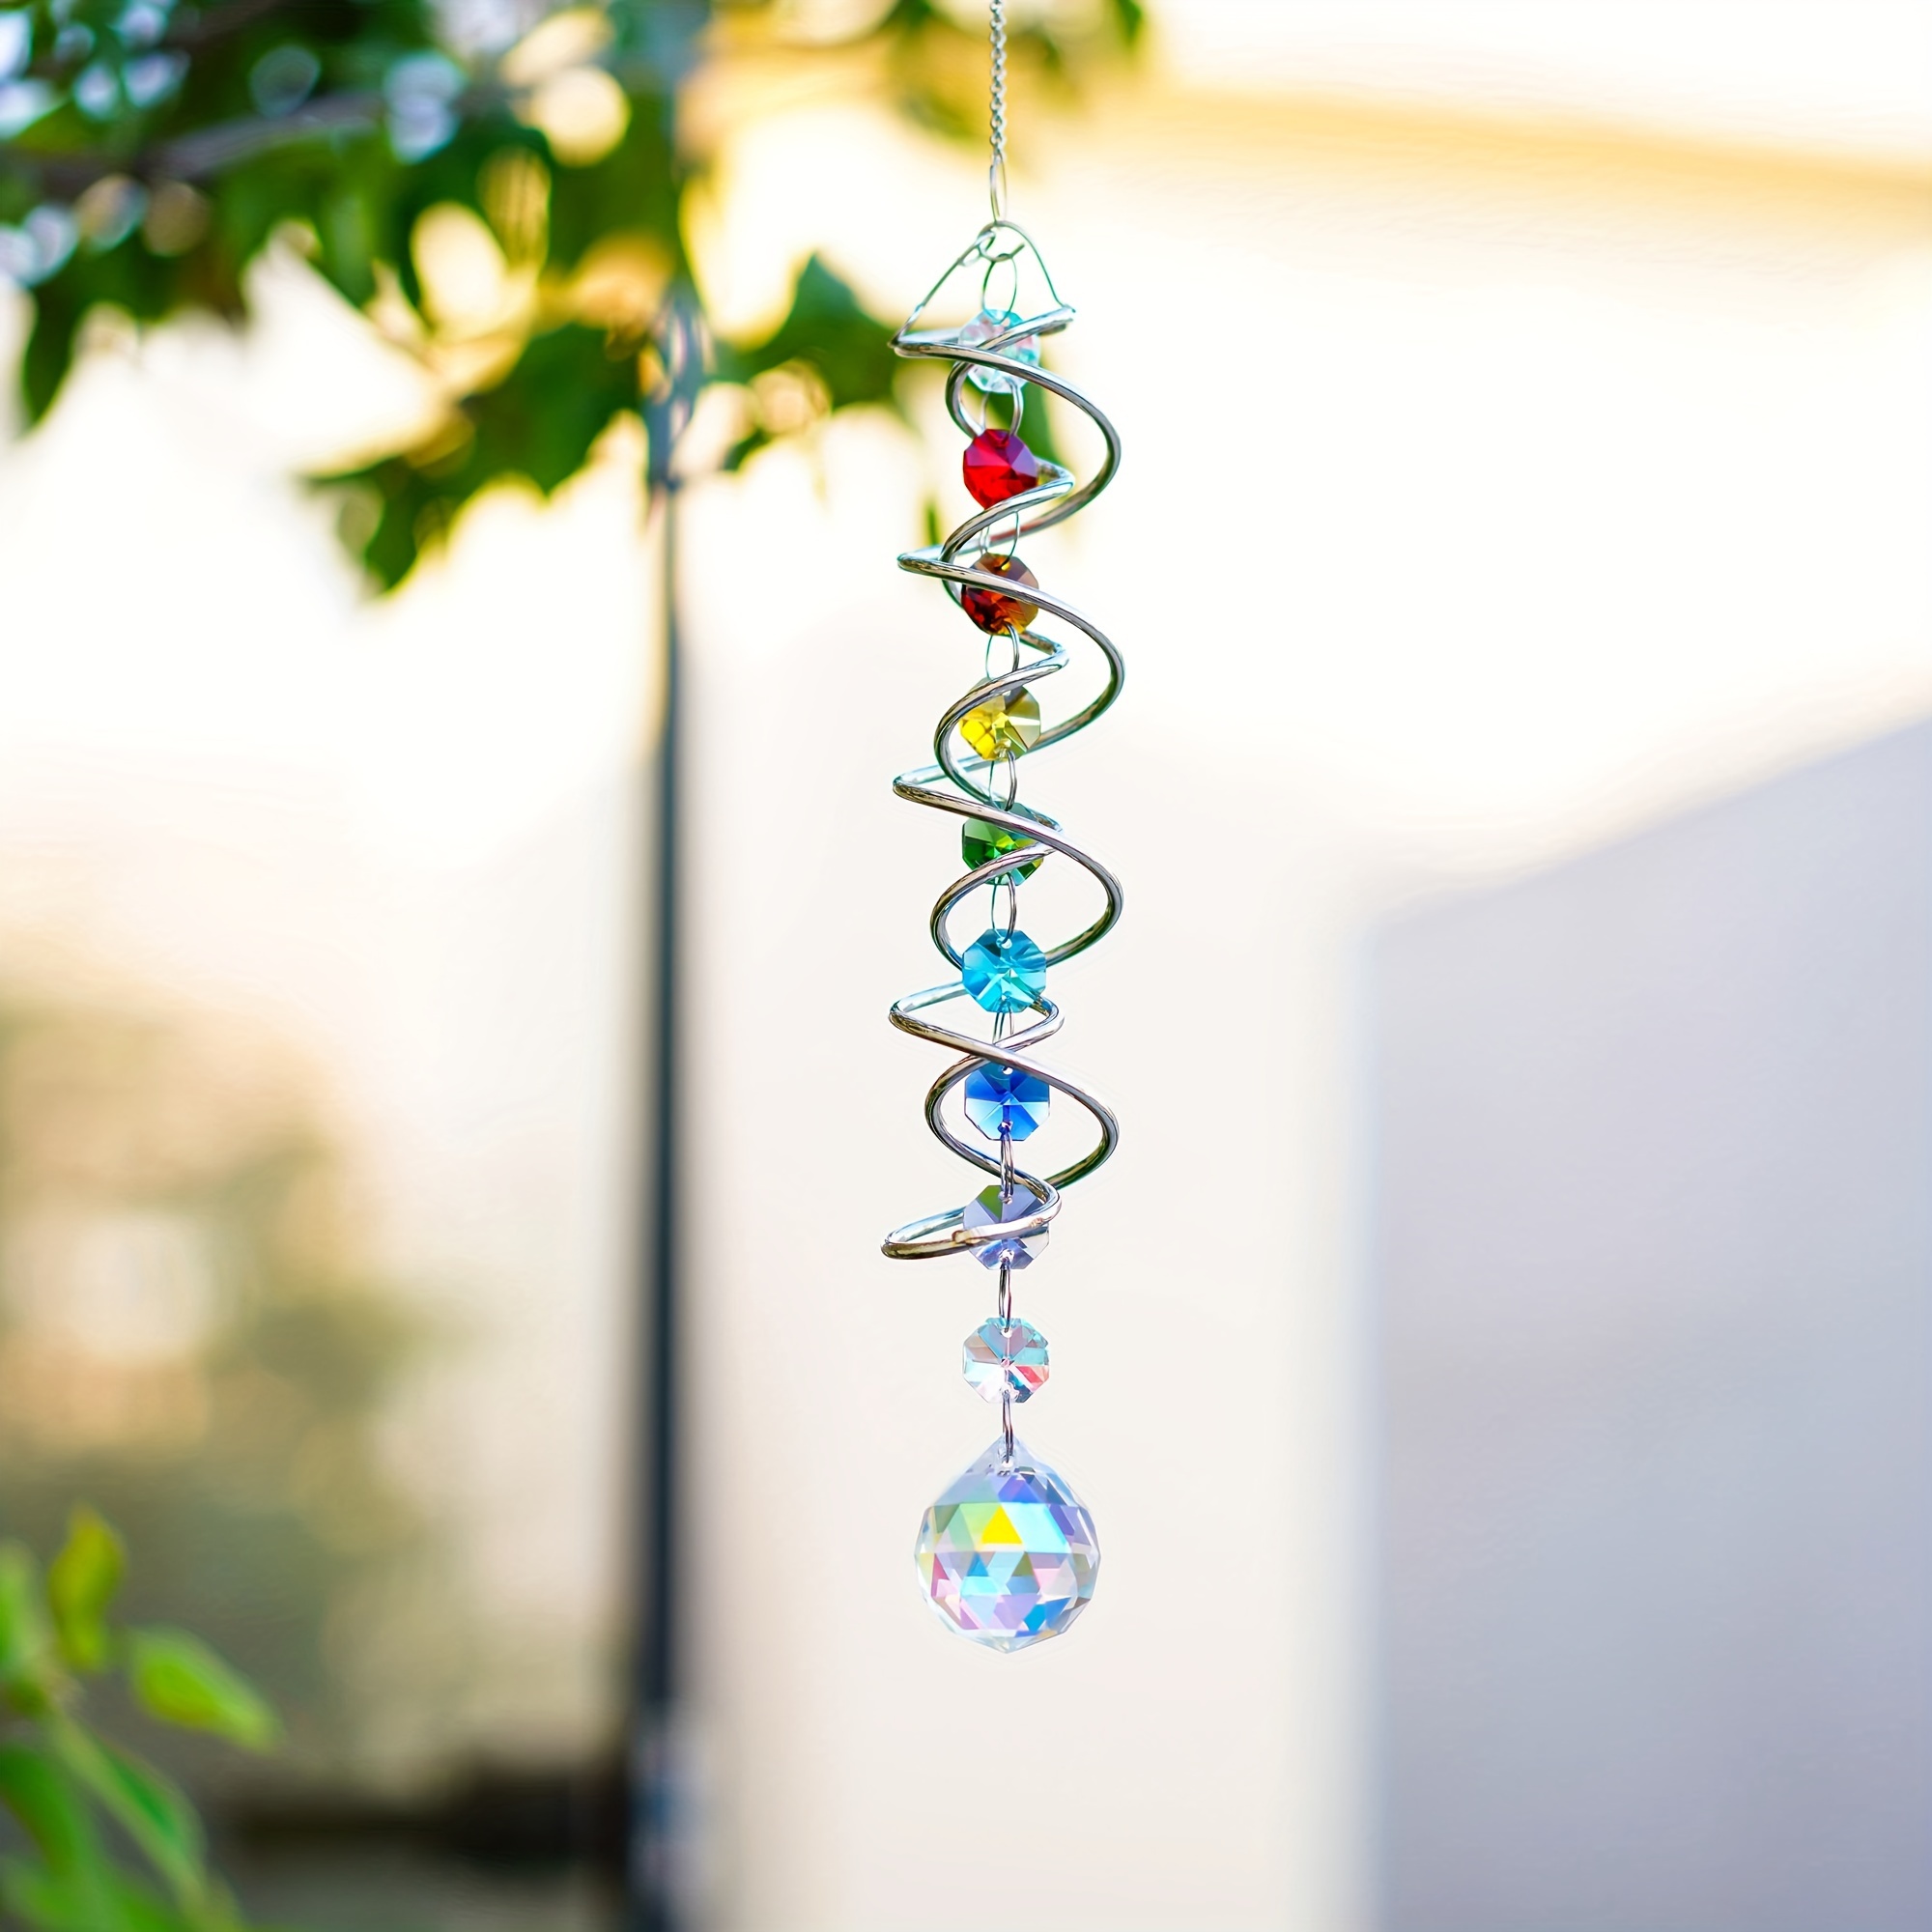 

1pc Crystal Suncatcher Wind Spinner, 3d Gazing Ball Spiral Tail With Hanging Hook, 17.72 Inches Rainbow Maker, Classic Style Wind Chime For Garden & Home Decor